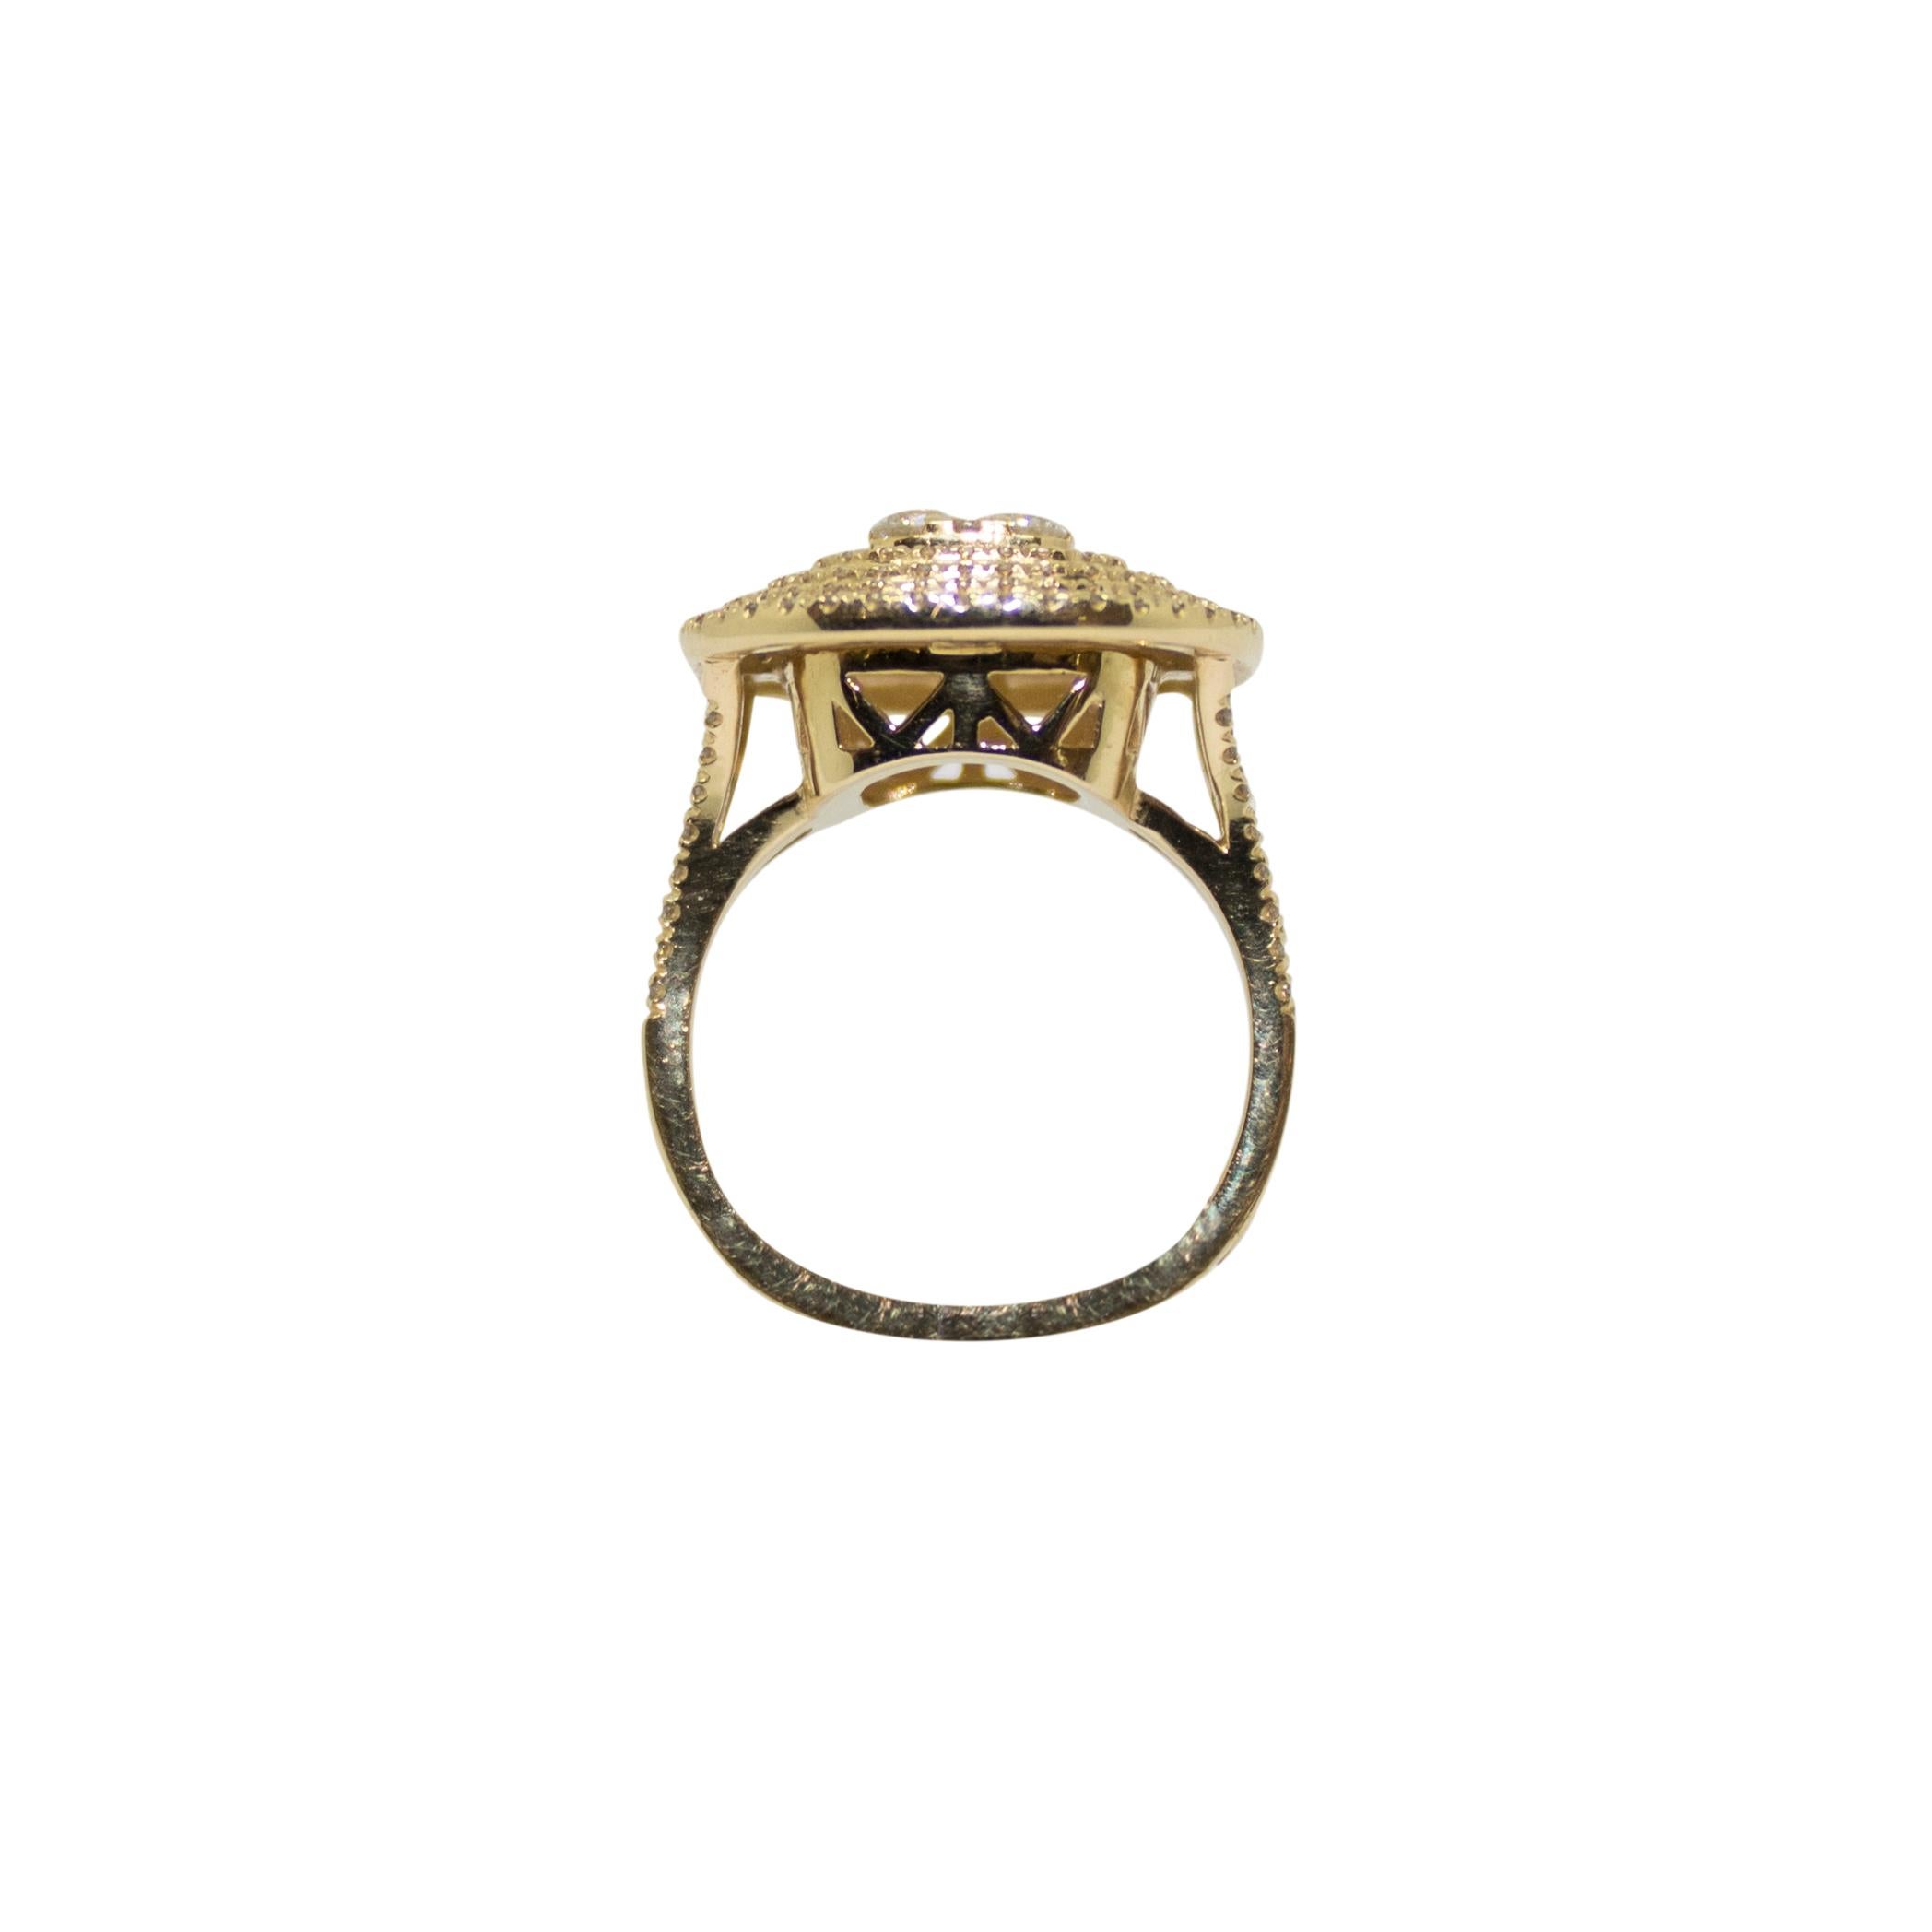 The centre stones comprise a 1.4 carat cluster, surrounded by a triple diamond halo, claw set in 14K yellow gold with split shoulder design containing a half eternity collection of diamond pointers. This bespoke piece can be altered to accommodate